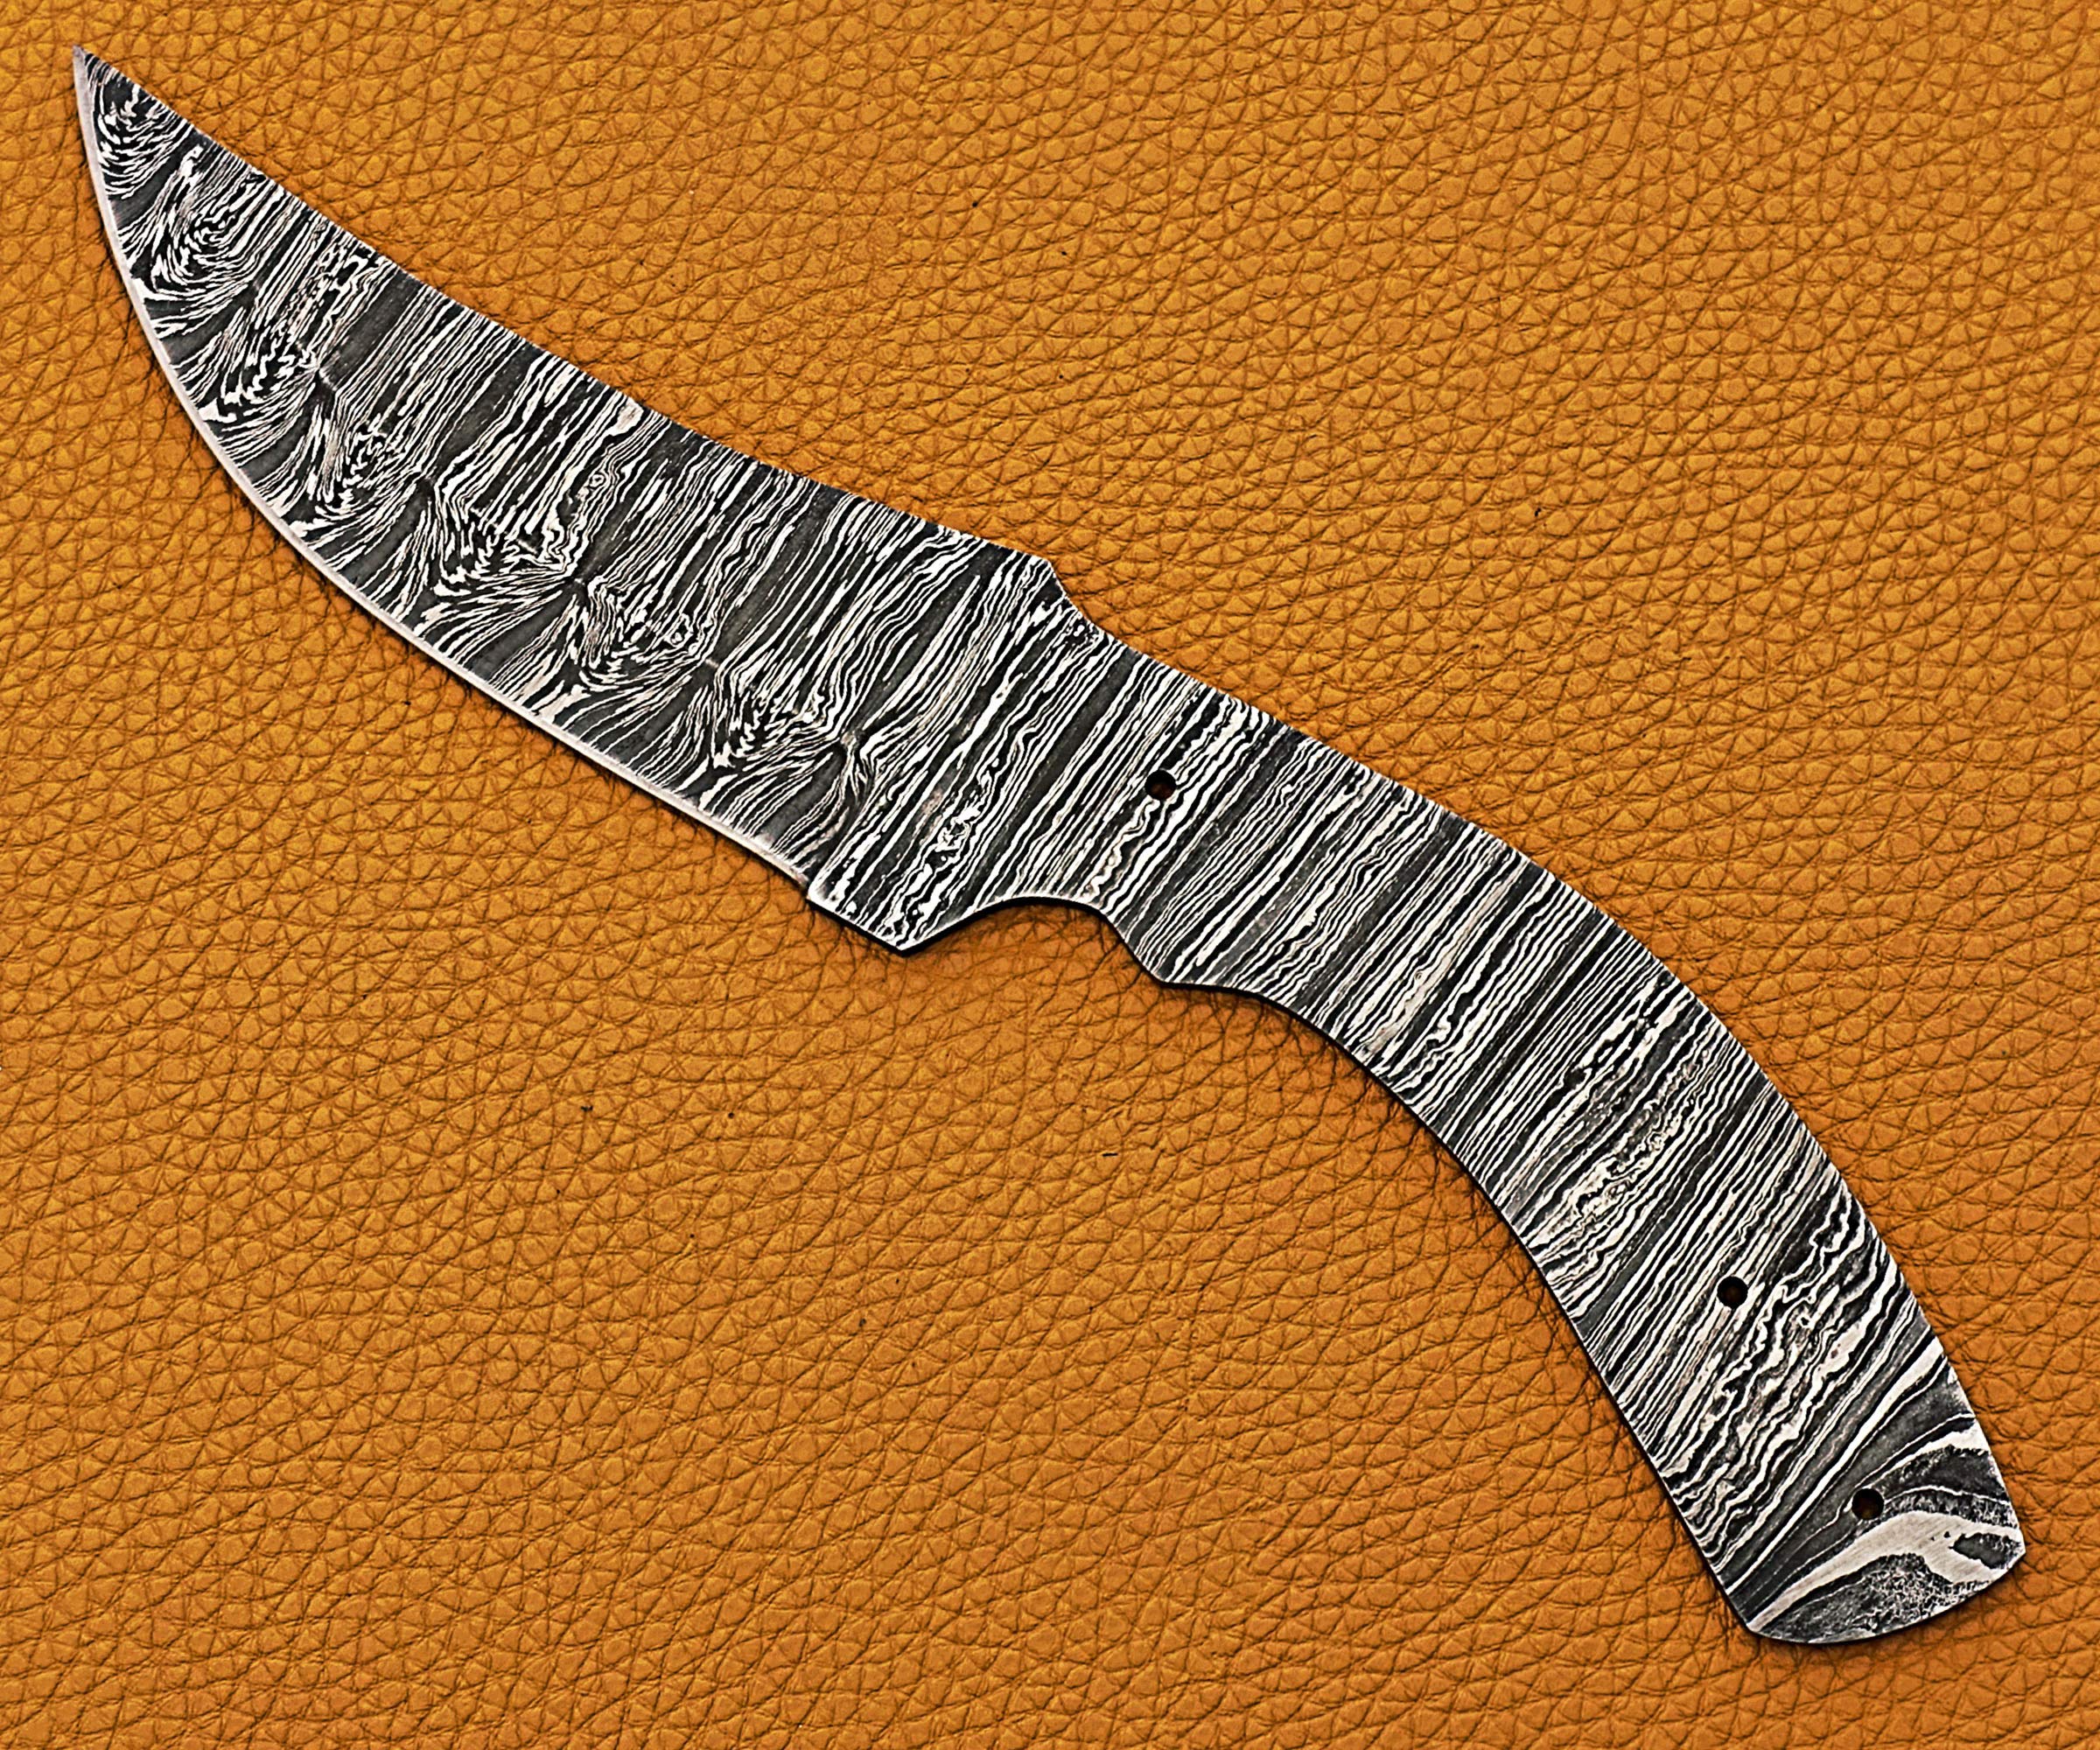 9.25 inches long trailing point blank blade skinning knife, hand forged Ladder Pattern Damascus steel blade, 4.5" scale with 3 Pin hole, 4.25" trailing point blade with 4" cutting edge